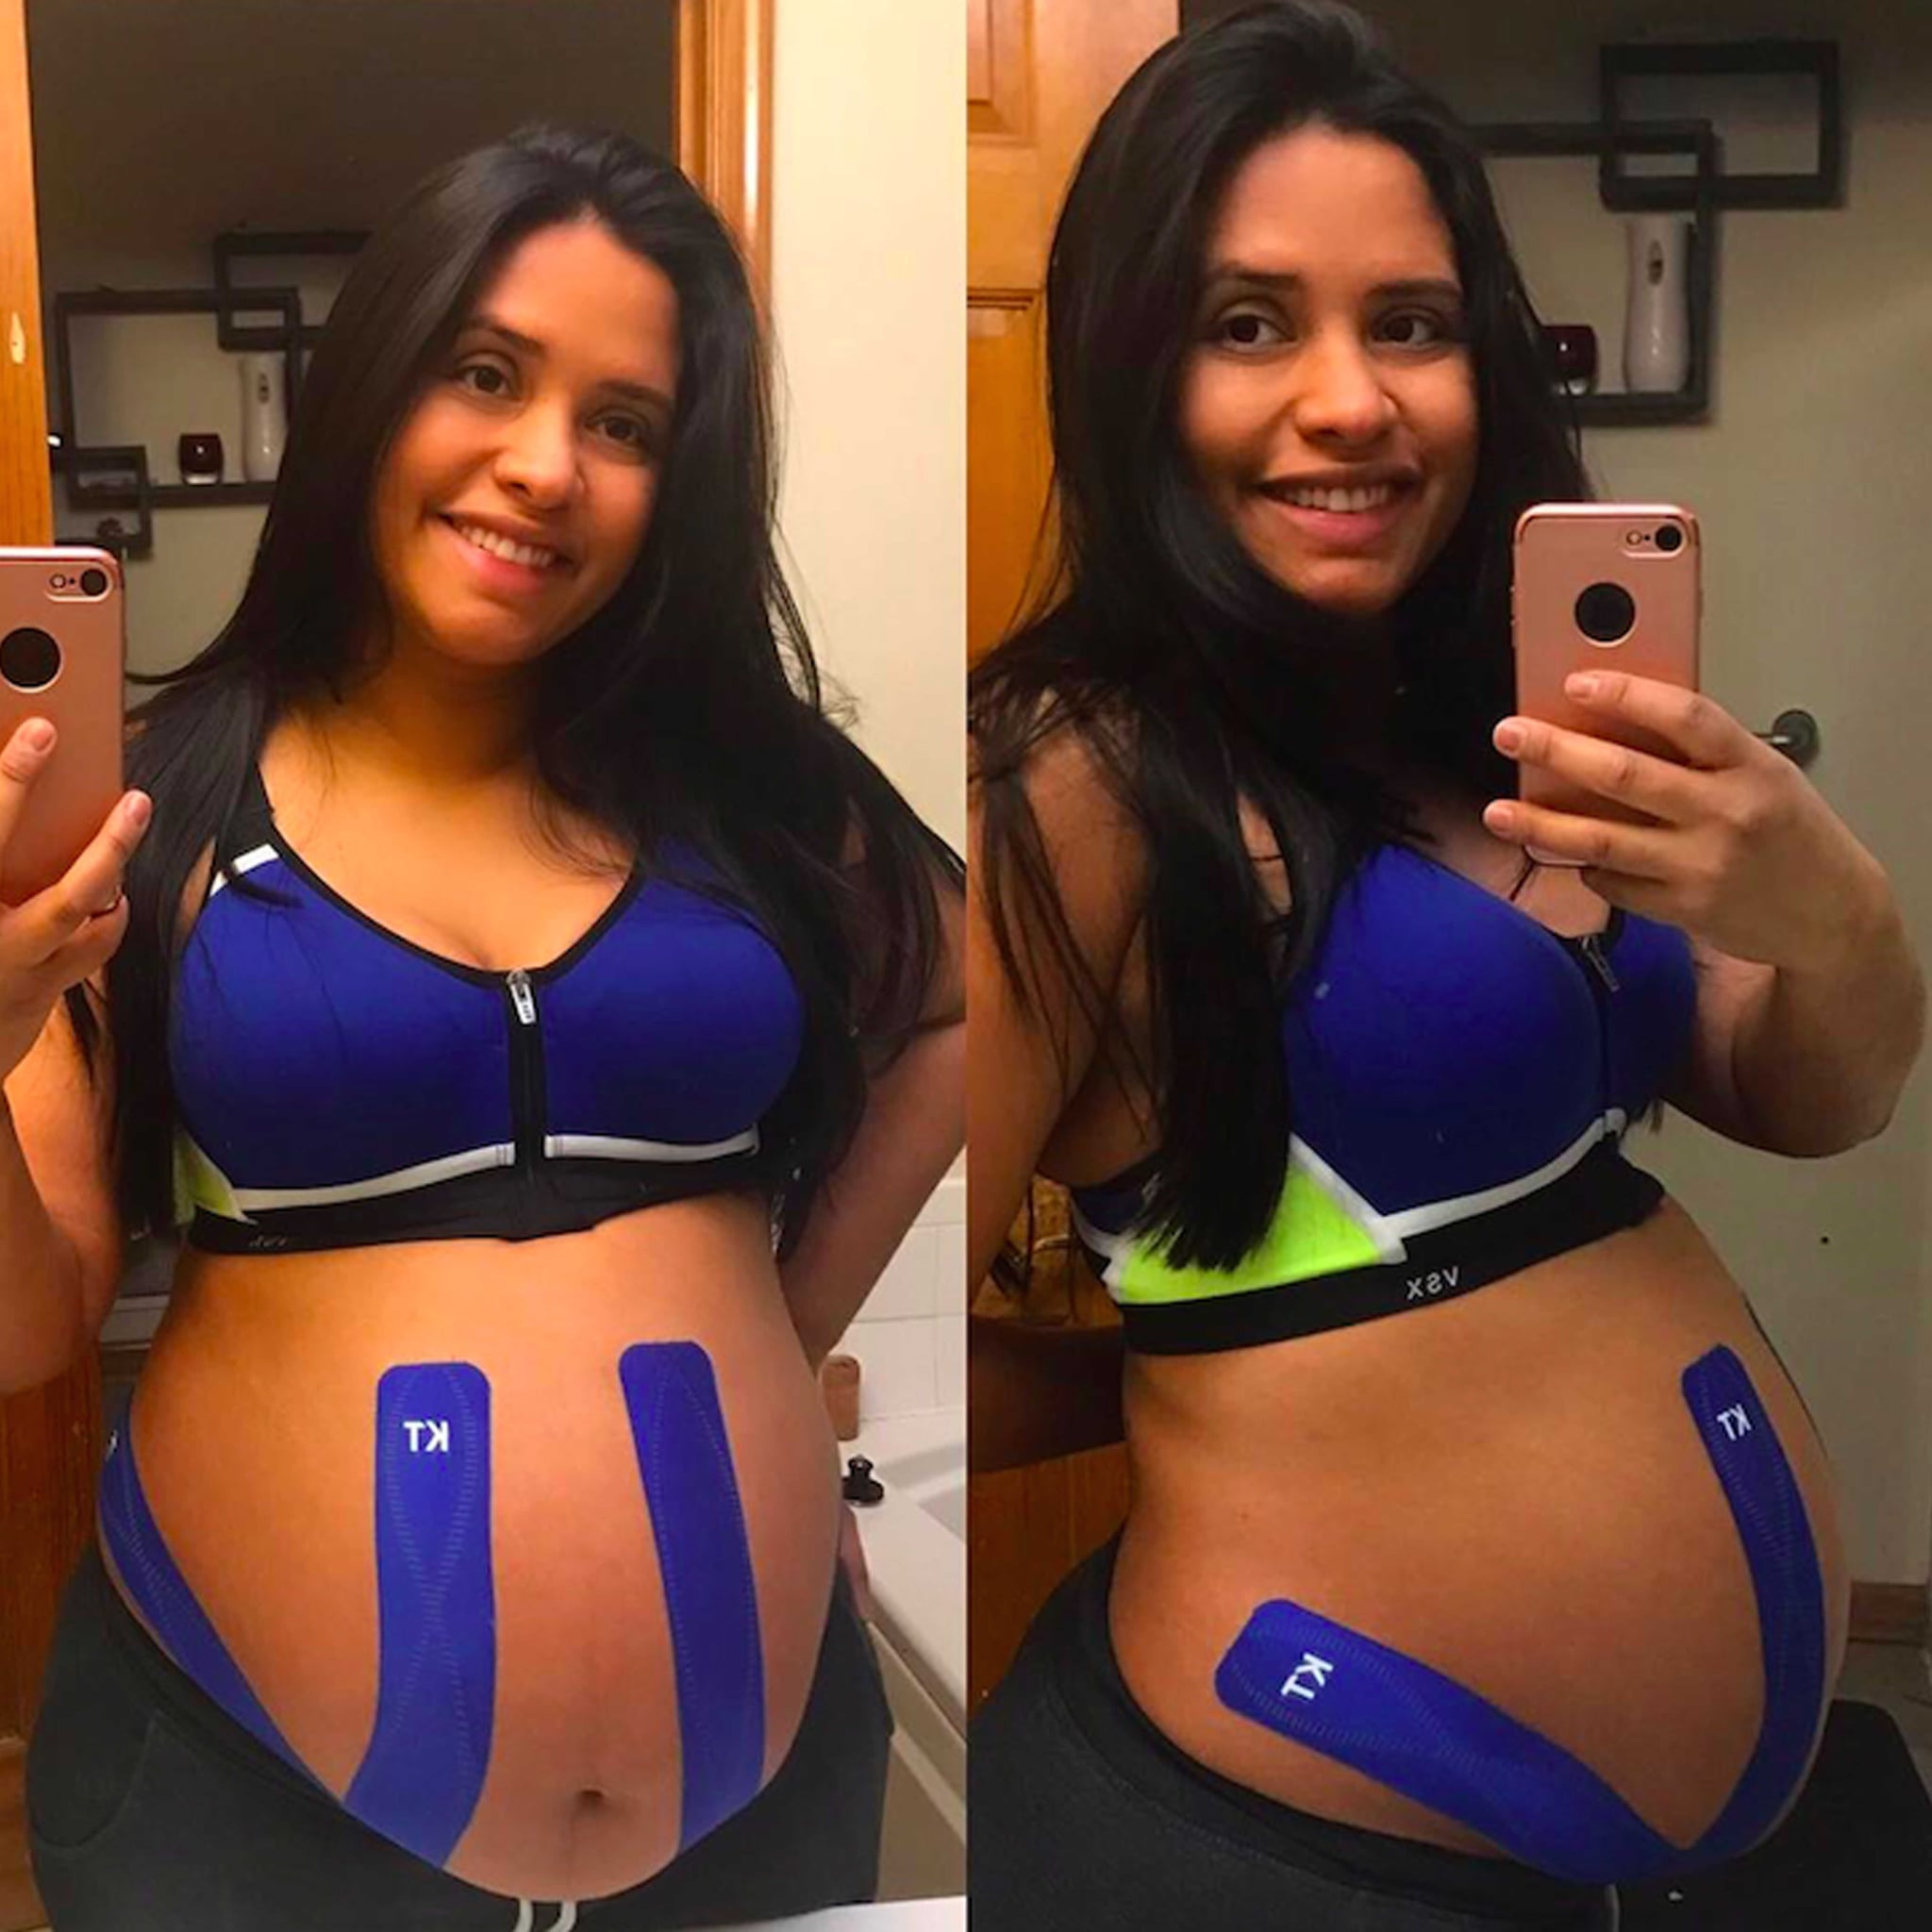 Does KT Tape Work For Pregnancy?